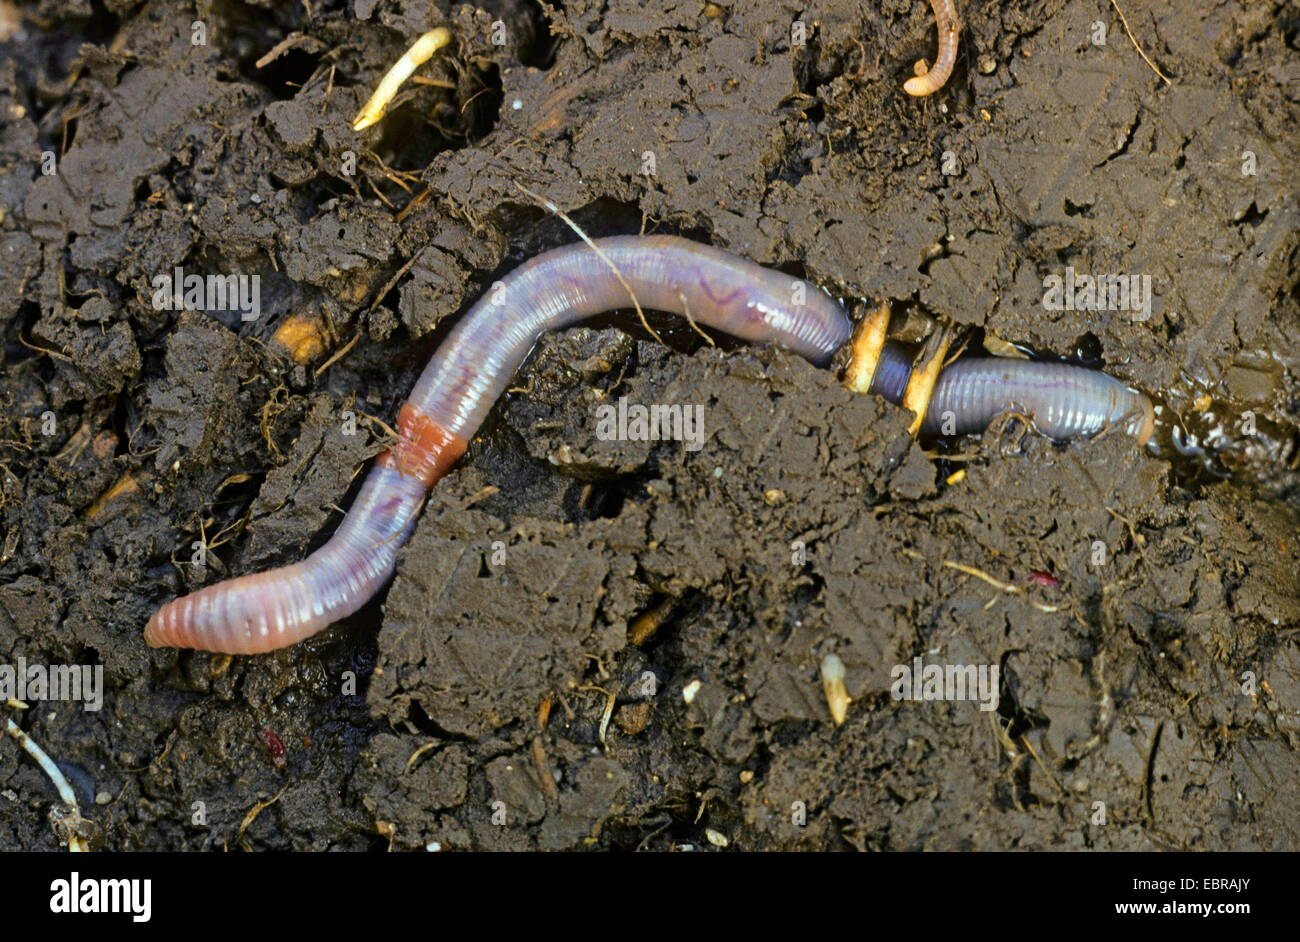 common earthworm, earthworm; lob worm, dew worm, squirreltail worm, twachel (Lumbricus terrestris), cross section through the ground with earthworm in its burrow, Germany Stock Photo